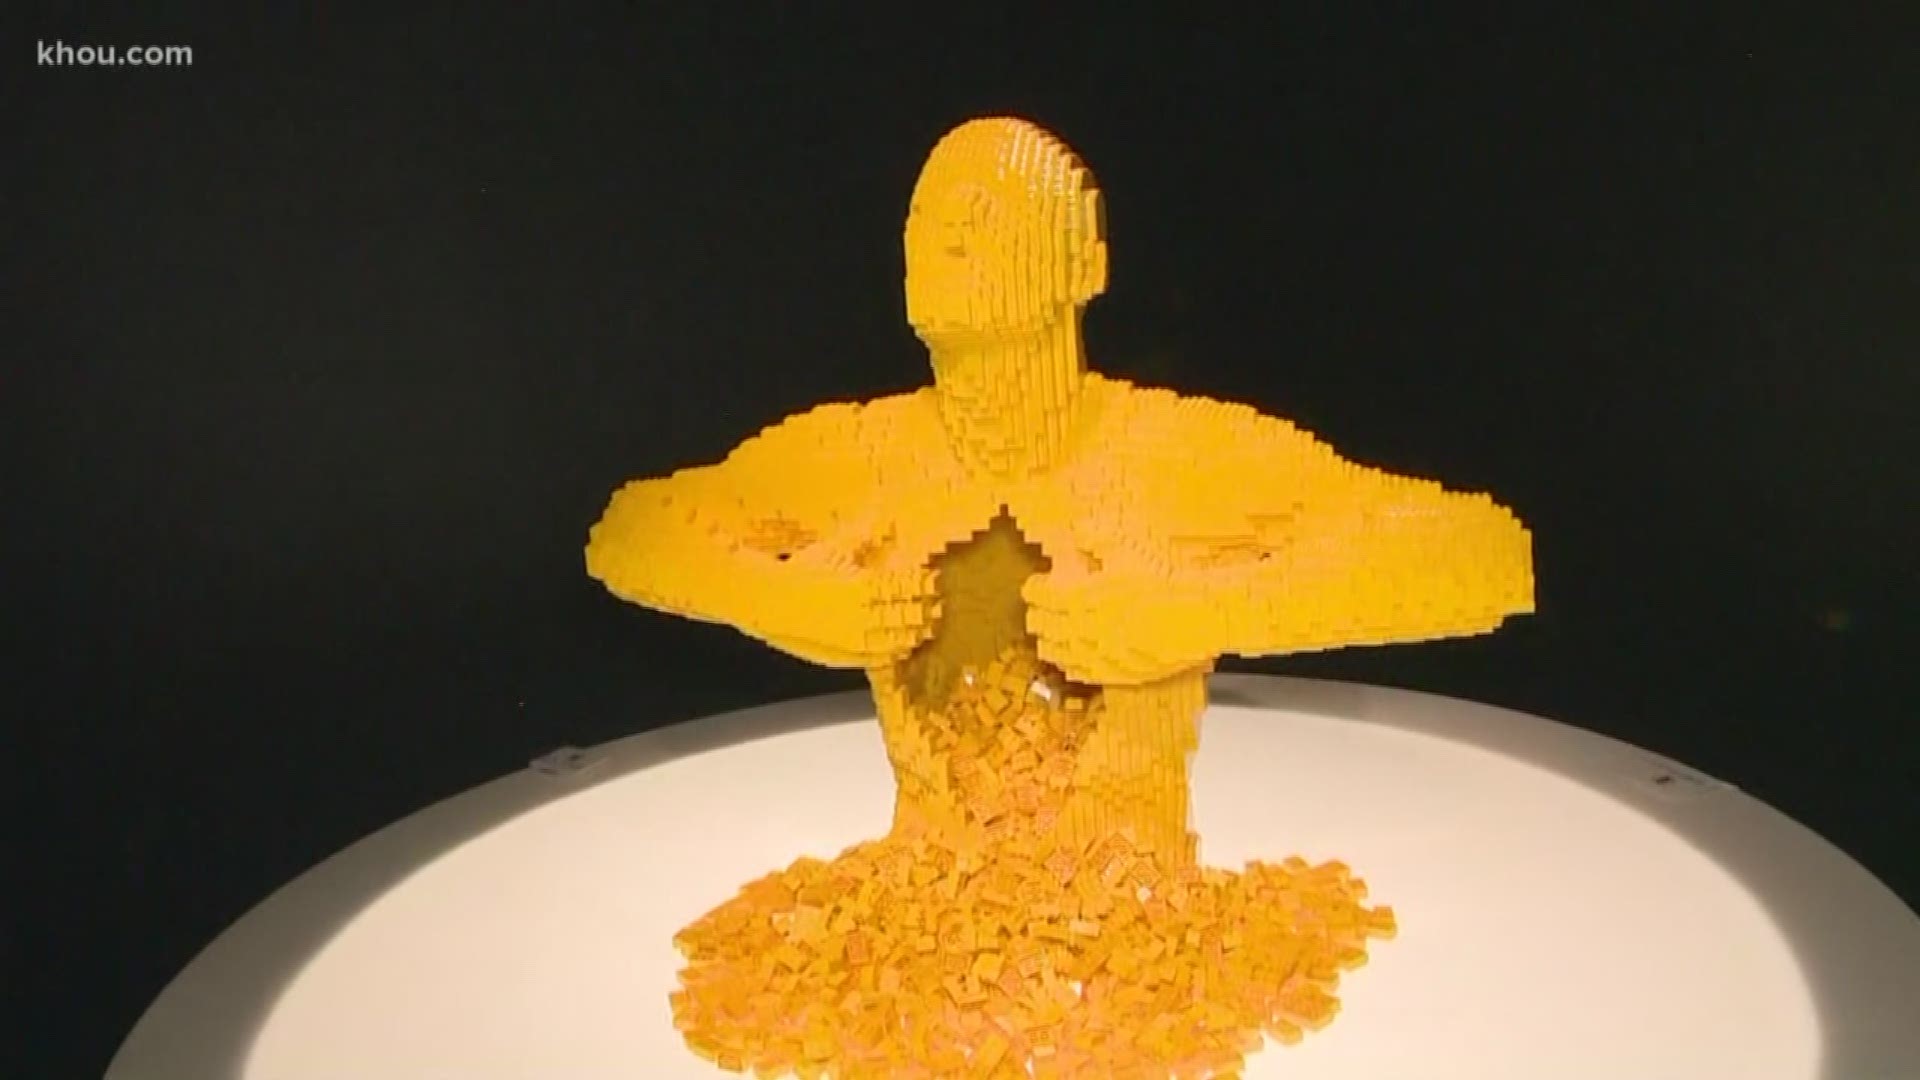 The world’s largest display of LEGO art is a must-see exhibit now open at the Houston Museum of Natural Science.